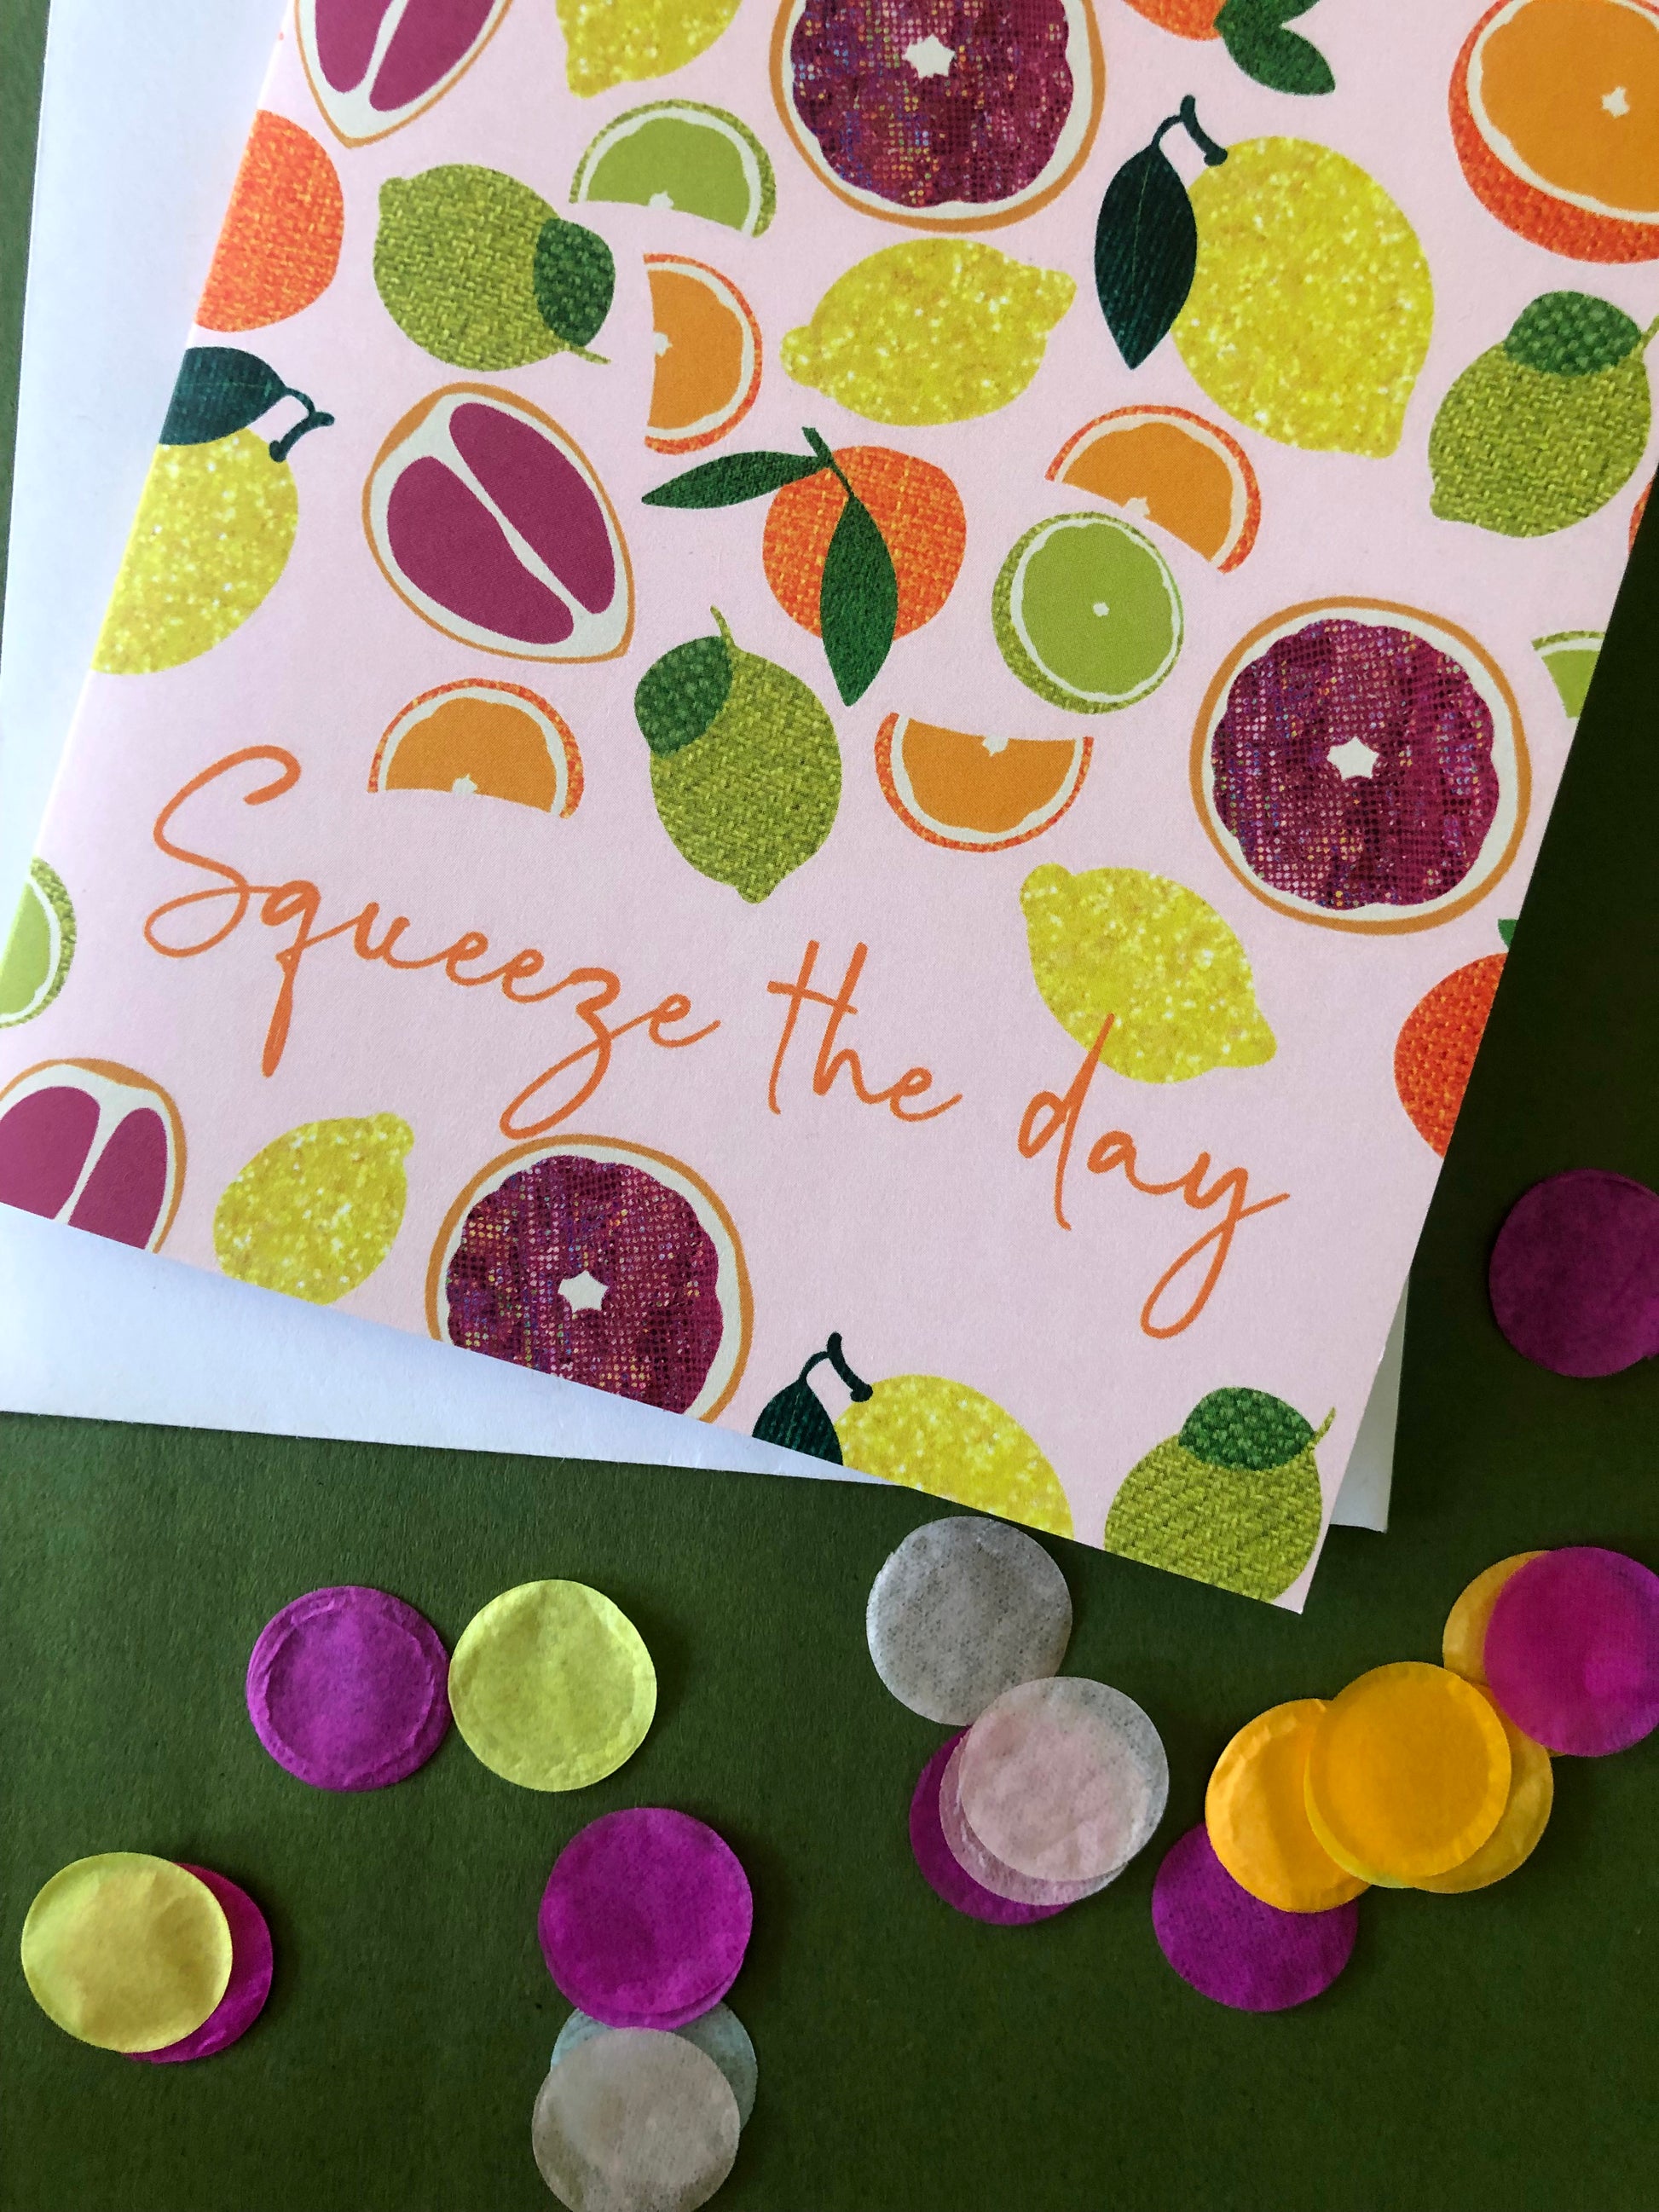 Everyday greetings card that says 'squeeze the day' and features a fun pattern of lemons, oranges, tangerines and grapefruit